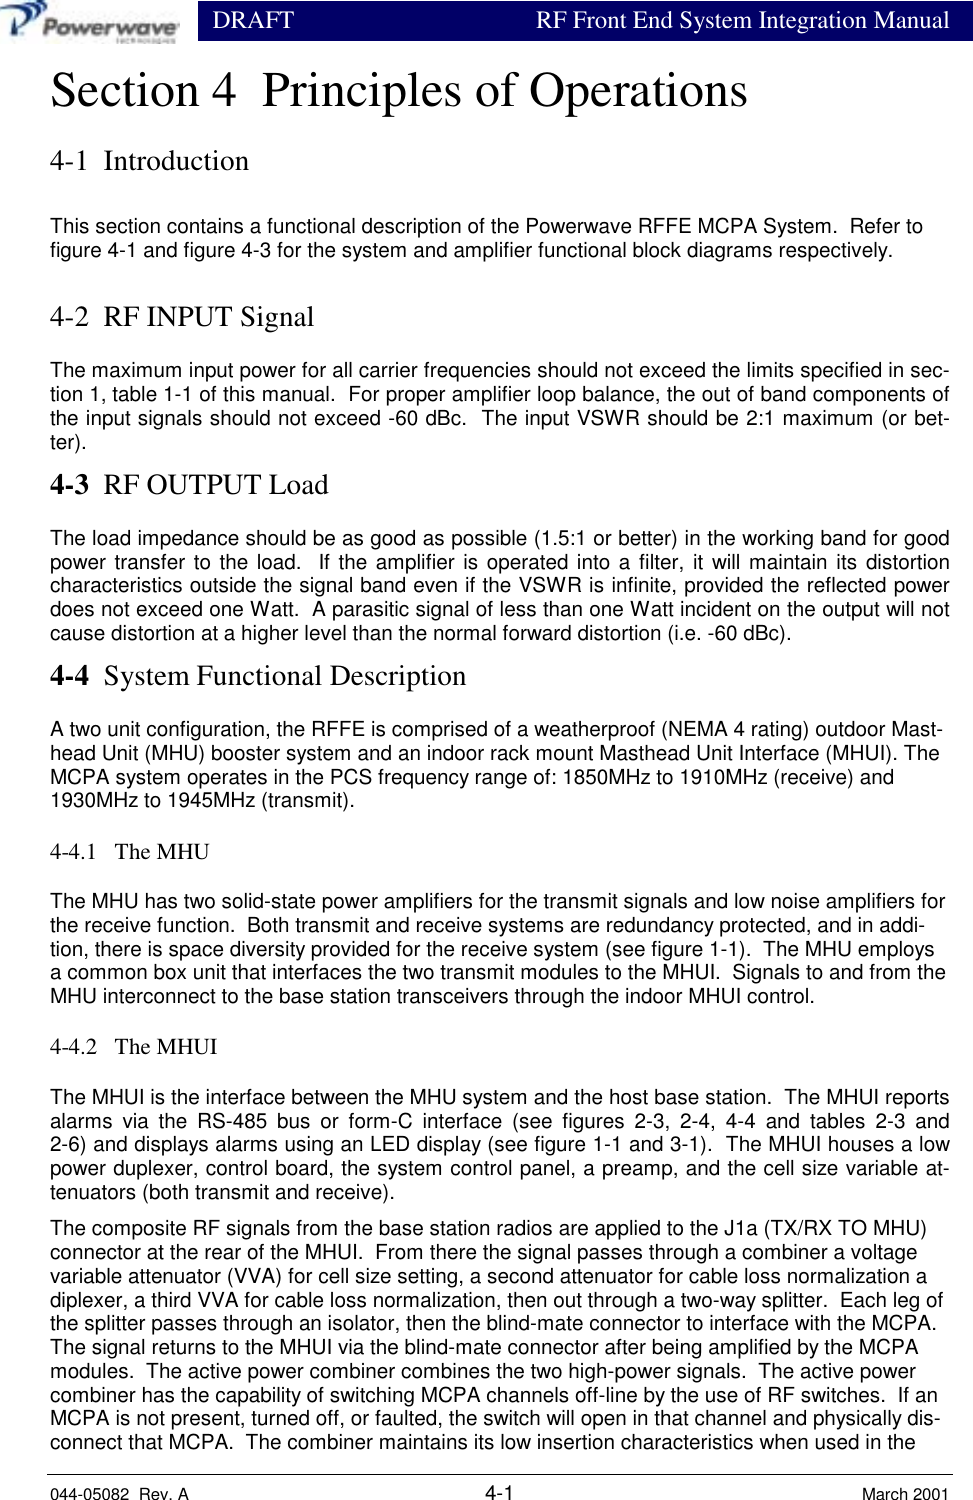                  DRAFT RF Front End System Integration Manual044-05082  Rev. A 4-1 March 2001Section 4  Principles of Operations4-1  IntroductionThis section contains a functional description of the Powerwave RFFE MCPA System.  Refer tofigure 4-1 and figure 4-3 for the system and amplifier functional block diagrams respectively.4-2  RF INPUT SignalThe maximum input power for all carrier frequencies should not exceed the limits specified in sec-tion 1, table 1-1 of this manual.  For proper amplifier loop balance, the out of band components ofthe input signals should not exceed -60 dBc.  The input VSWR should be 2:1 maximum (or bet-ter).4-3  RF OUTPUT LoadThe load impedance should be as good as possible (1.5:1 or better) in the working band for goodpower transfer to the load.  If the amplifier is operated into a filter, it will maintain its distortioncharacteristics outside the signal band even if the VSWR is infinite, provided the reflected powerdoes not exceed one Watt.  A parasitic signal of less than one Watt incident on the output will notcause distortion at a higher level than the normal forward distortion (i.e. -60 dBc).4-4  System Functional DescriptionA two unit configuration, the RFFE is comprised of a weatherproof (NEMA 4 rating) outdoor Mast-head Unit (MHU) booster system and an indoor rack mount Masthead Unit Interface (MHUI). TheMCPA system operates in the PCS frequency range of: 1850MHz to 1910MHz (receive) and1930MHz to 1945MHz (transmit).4-4.1   The MHUThe MHU has two solid-state power amplifiers for the transmit signals and low noise amplifiers forthe receive function.  Both transmit and receive systems are redundancy protected, and in addi-tion, there is space diversity provided for the receive system (see figure 1-1).  The MHU employsa common box unit that interfaces the two transmit modules to the MHUI.  Signals to and from theMHU interconnect to the base station transceivers through the indoor MHUI control.4-4.2   The MHUIThe MHUI is the interface between the MHU system and the host base station.  The MHUI reportsalarms via the RS-485 bus or form-C interface (see figures 2-3, 2-4, 4-4 and tables 2-3 and2-6) and displays alarms using an LED display (see figure 1-1 and 3-1).  The MHUI houses a lowpower duplexer, control board, the system control panel, a preamp, and the cell size variable at-tenuators (both transmit and receive).The composite RF signals from the base station radios are applied to the J1a (TX/RX TO MHU)connector at the rear of the MHUI.  From there the signal passes through a combiner a voltagevariable attenuator (VVA) for cell size setting, a second attenuator for cable loss normalization adiplexer, a third VVA for cable loss normalization, then out through a two-way splitter.  Each leg ofthe splitter passes through an isolator, then the blind-mate connector to interface with the MCPA.The signal returns to the MHUI via the blind-mate connector after being amplified by the MCPAmodules.  The active power combiner combines the two high-power signals.  The active powercombiner has the capability of switching MCPA channels off-line by the use of RF switches.  If anMCPA is not present, turned off, or faulted, the switch will open in that channel and physically dis-connect that MCPA.  The combiner maintains its low insertion characteristics when used in the